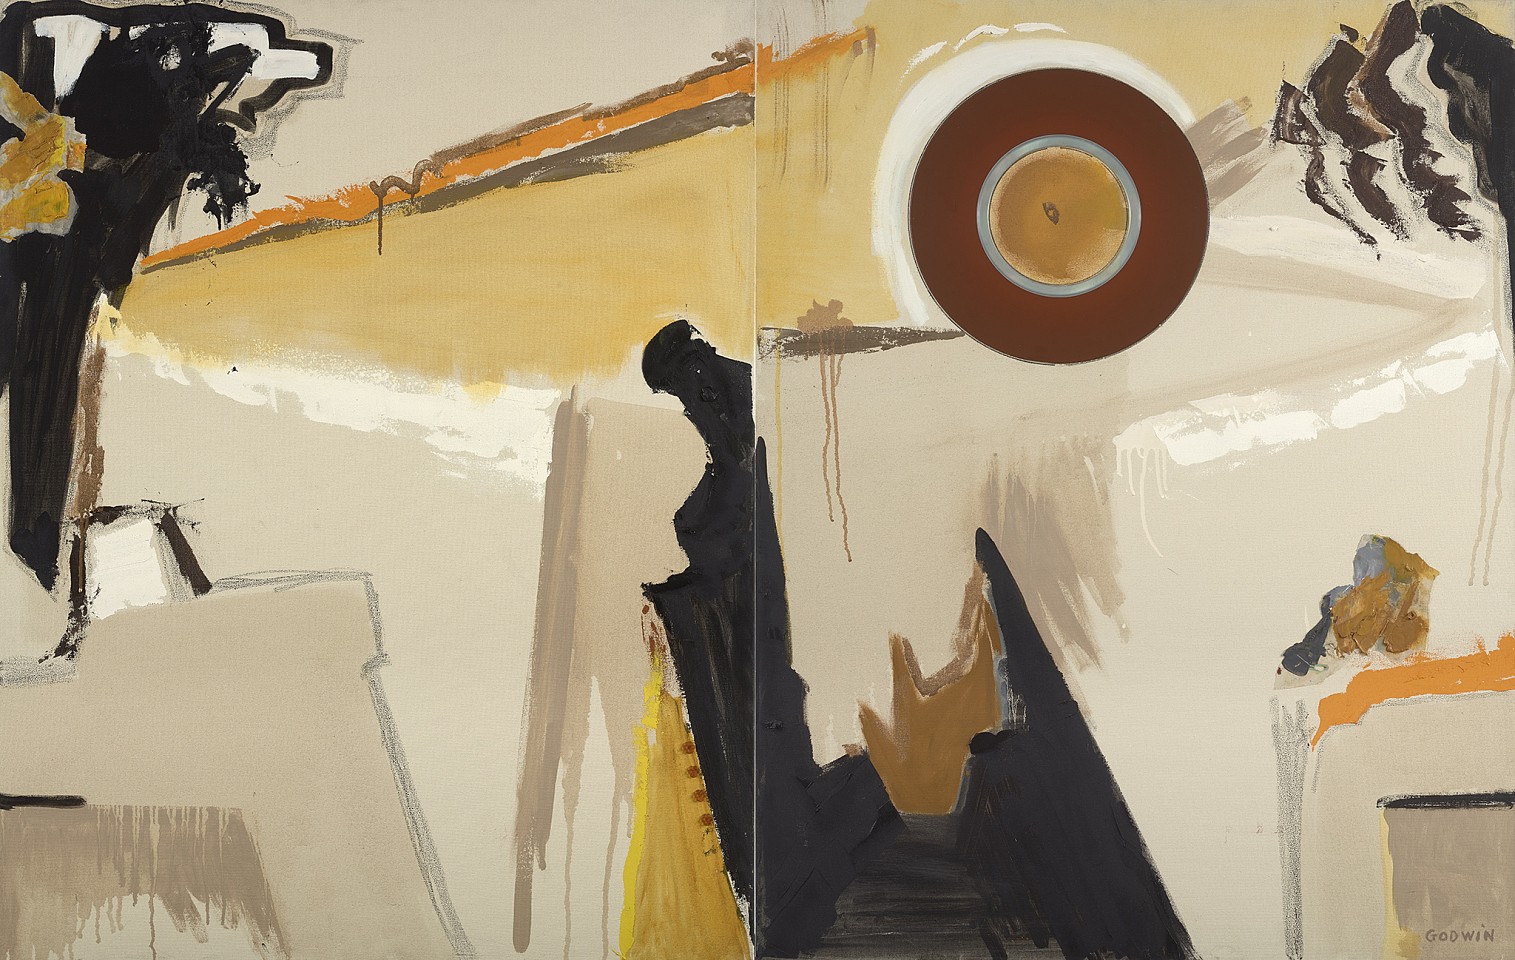 Judith Godwin, Watching, 1987
Oil and mixed media on canvas, 36 x 72 in. (91.4 x 182.9 cm)
GOD-00063